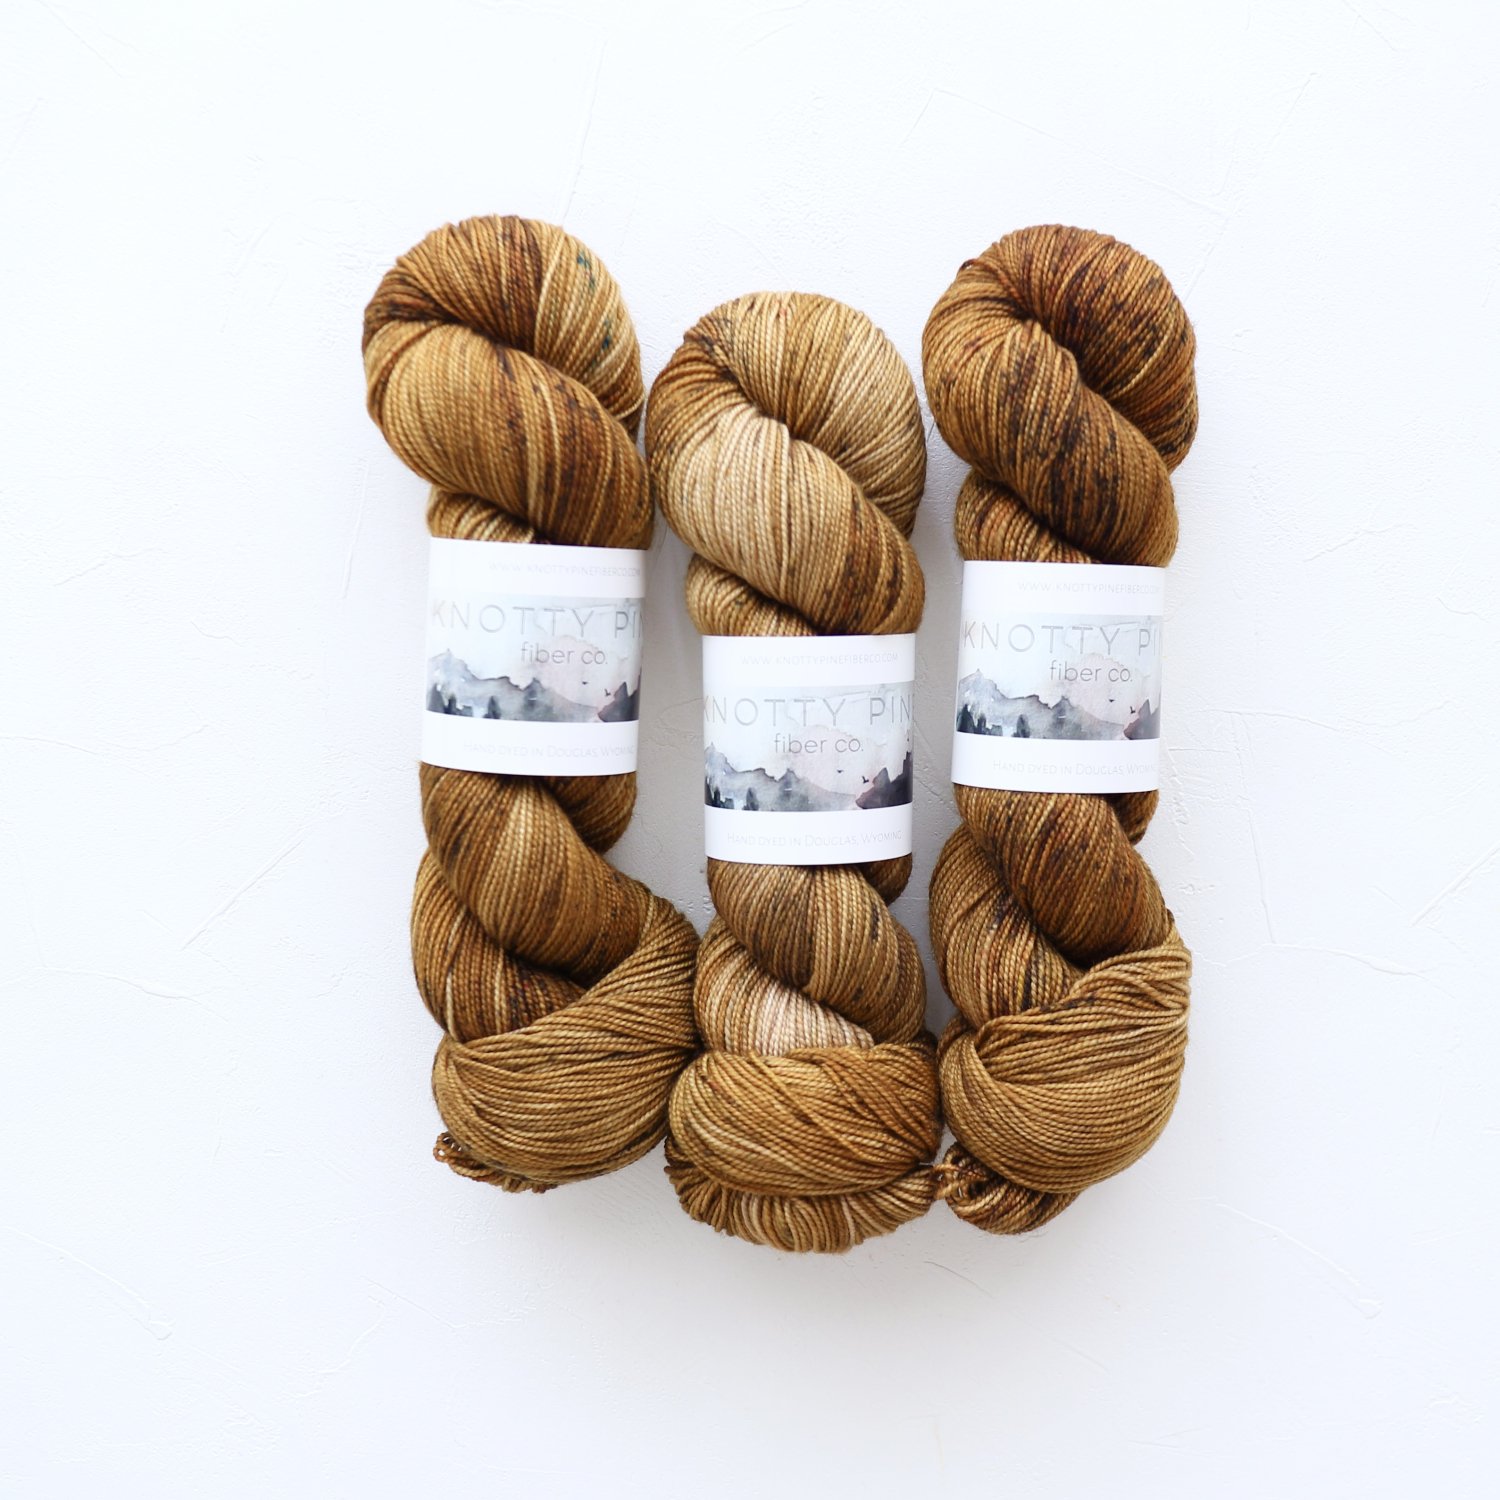 Knotty Pine Fiber Co.<br>Bighorn Sock<br>Fall is Brewing